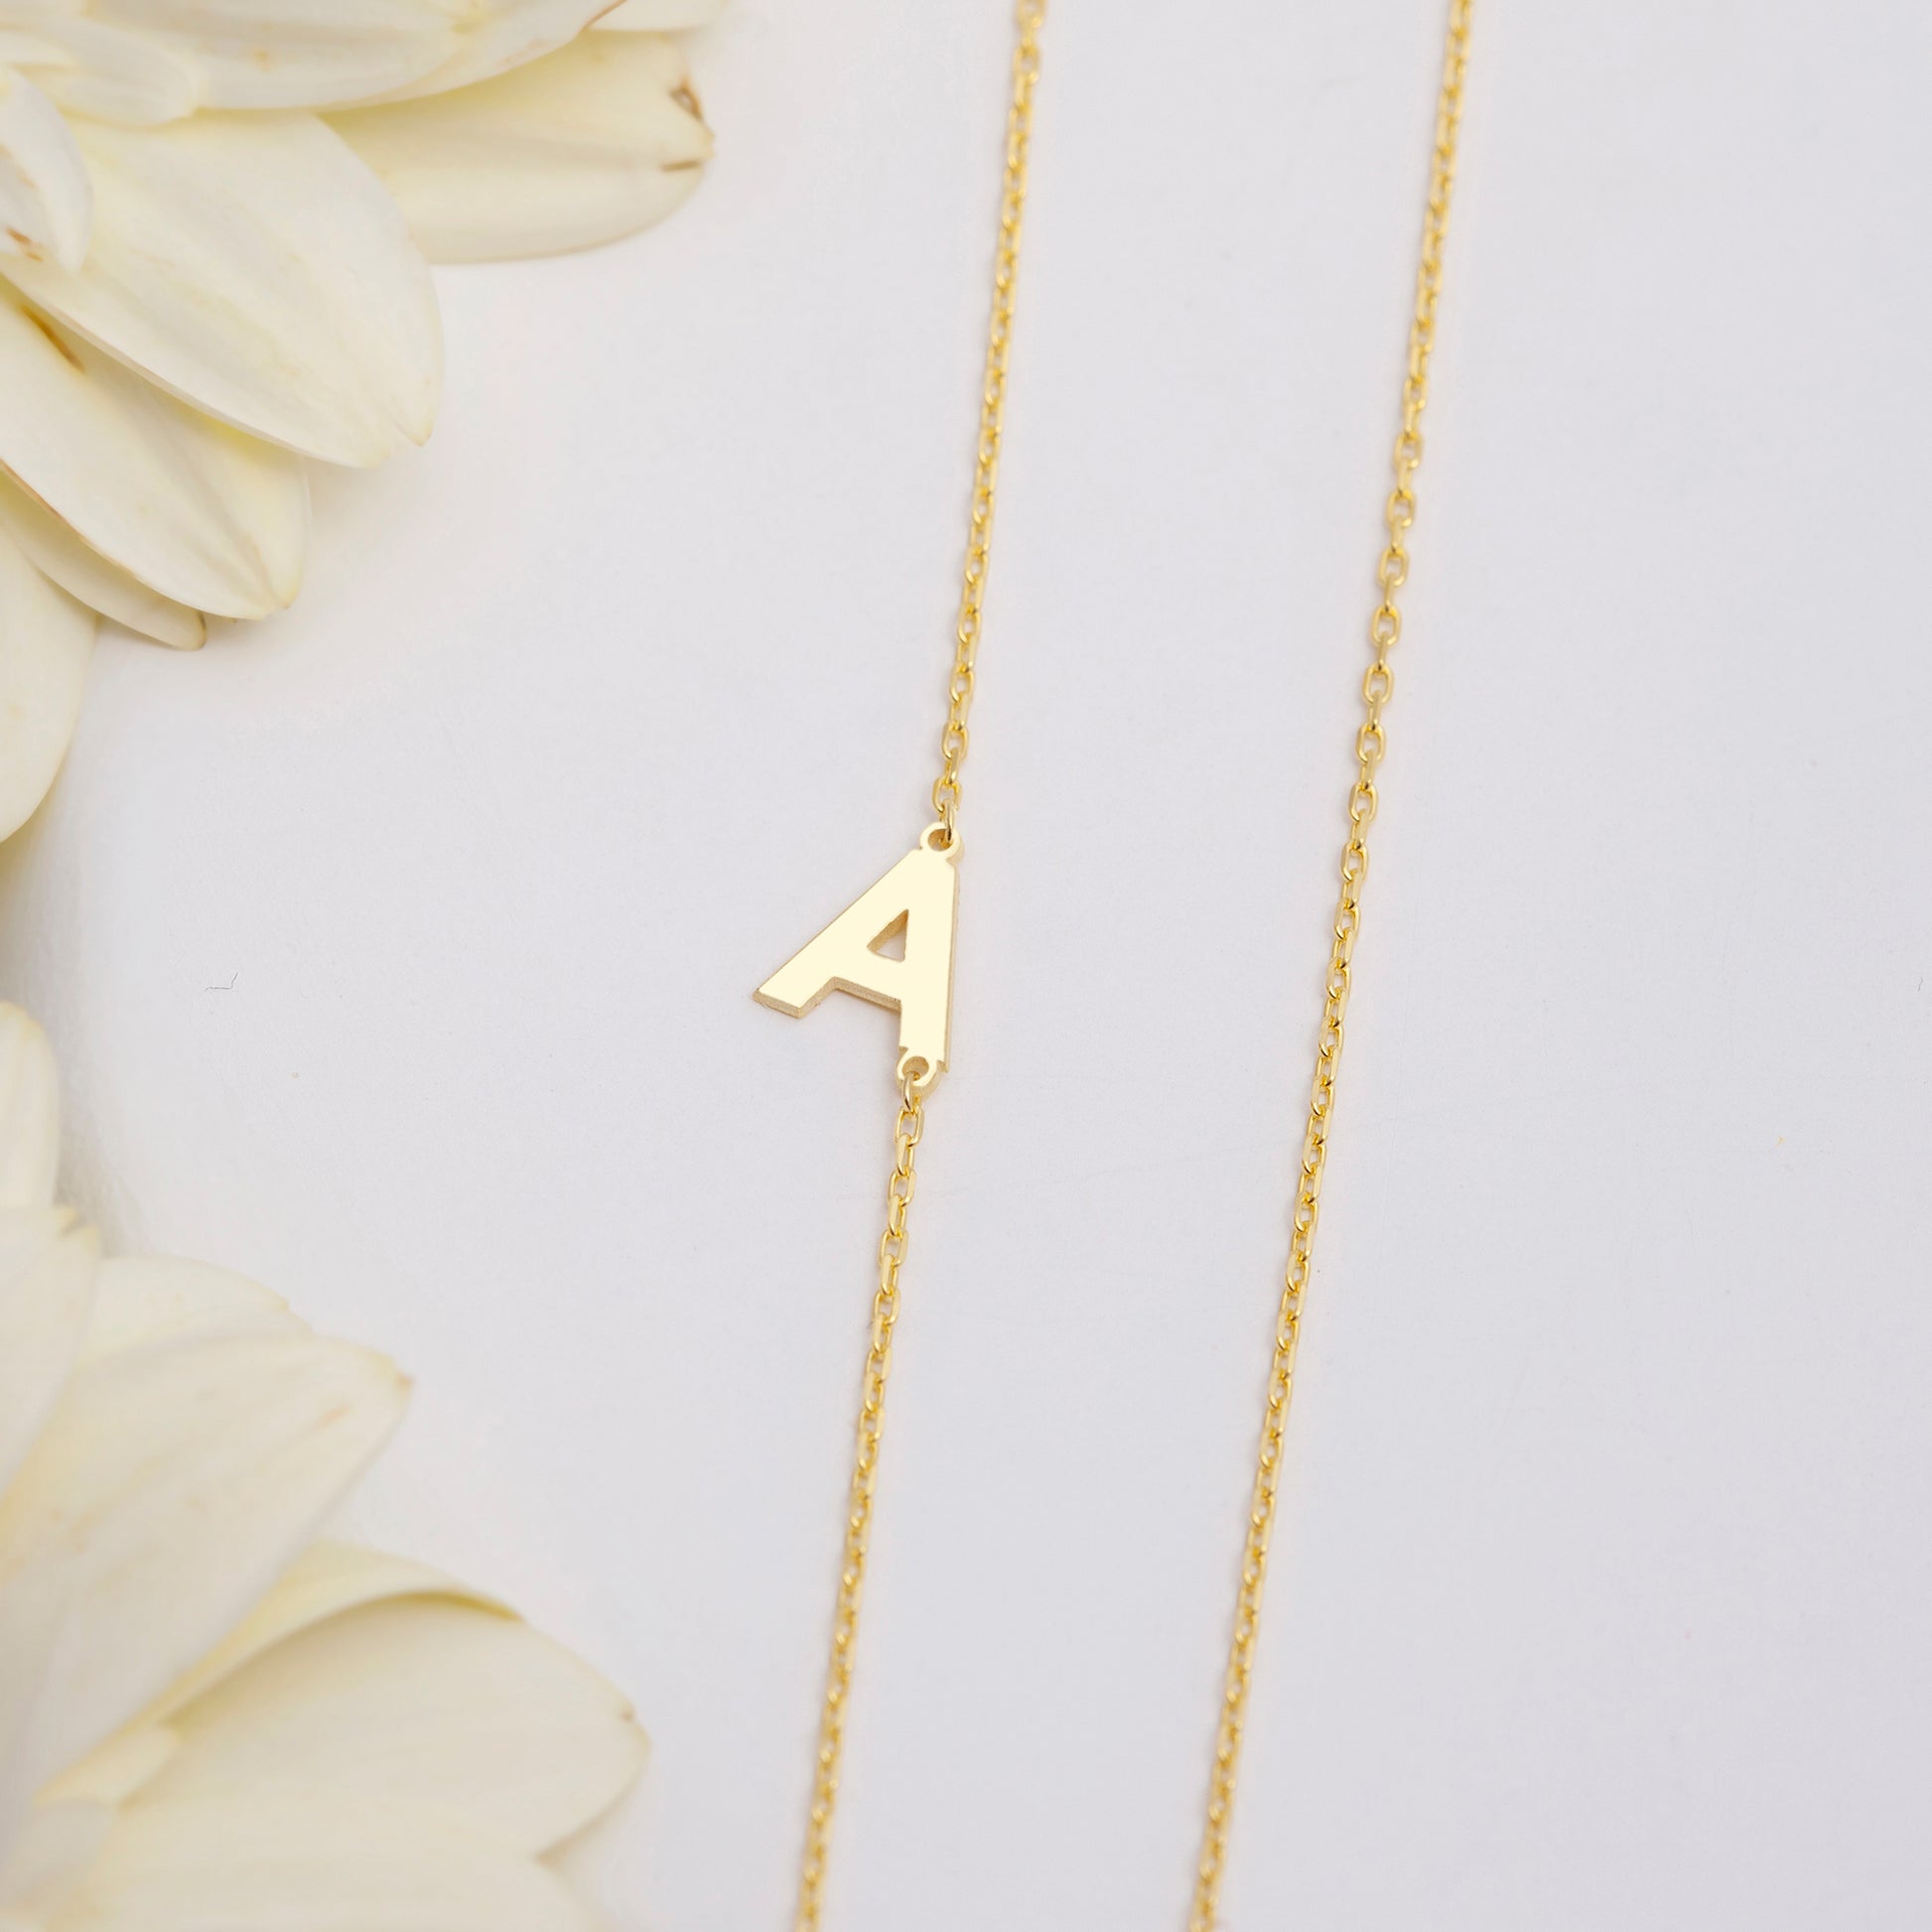 14K Solid Gold sideways Initial Necklace, 14K Real Gold Letter Necklace, Custom Initial Letter Necklace, Personalized Letter Jewellery gifts - Geniune Jewellery